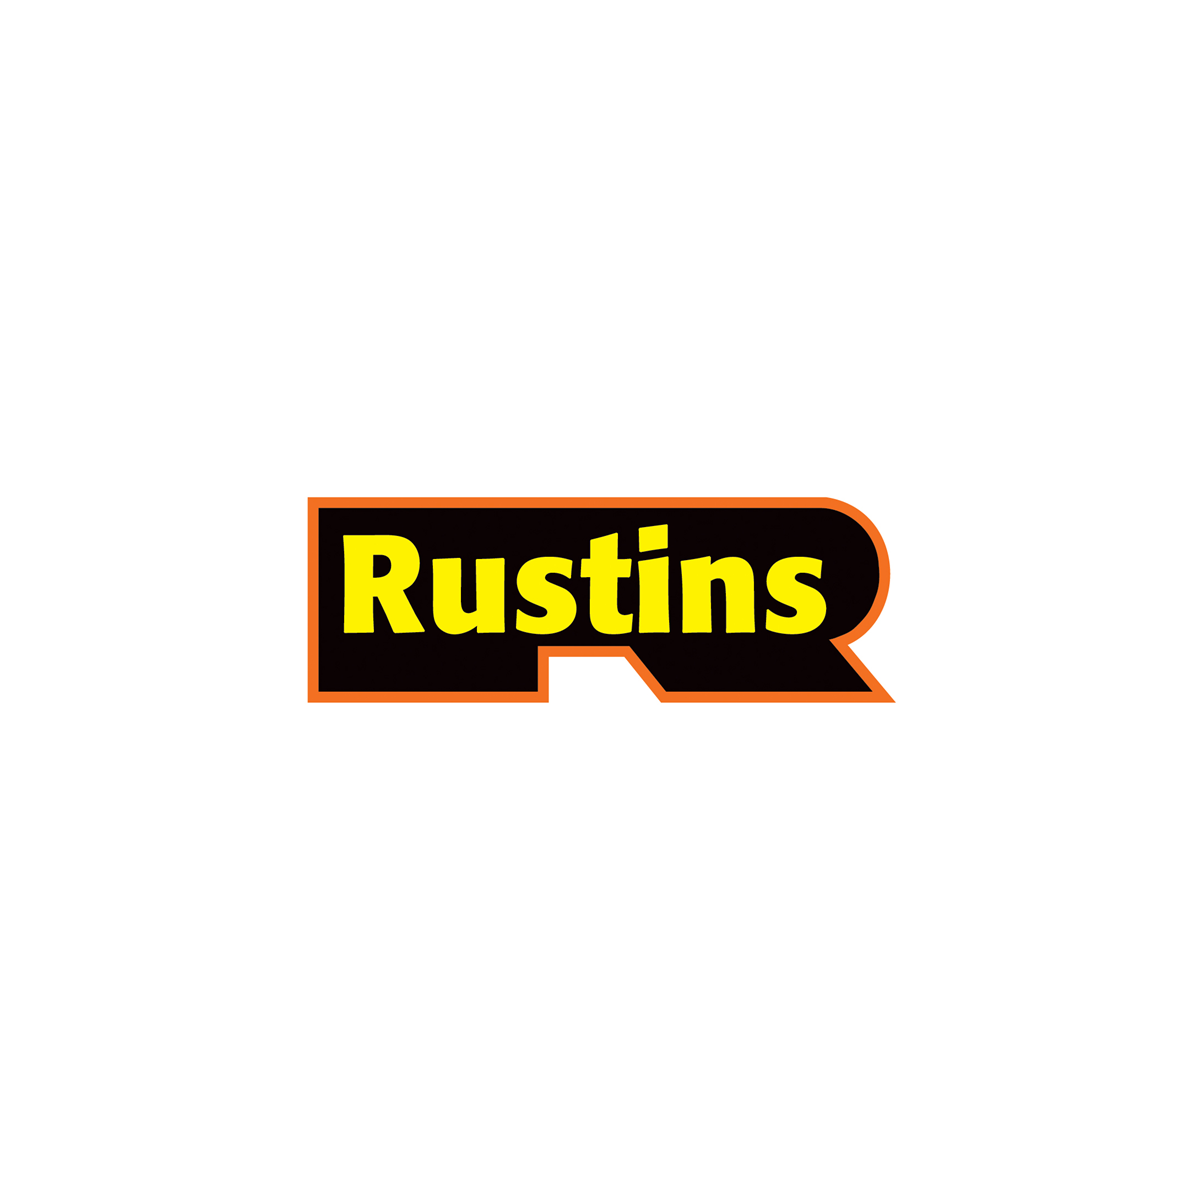 Where to Buy Rustins Outdoor Wood Stain